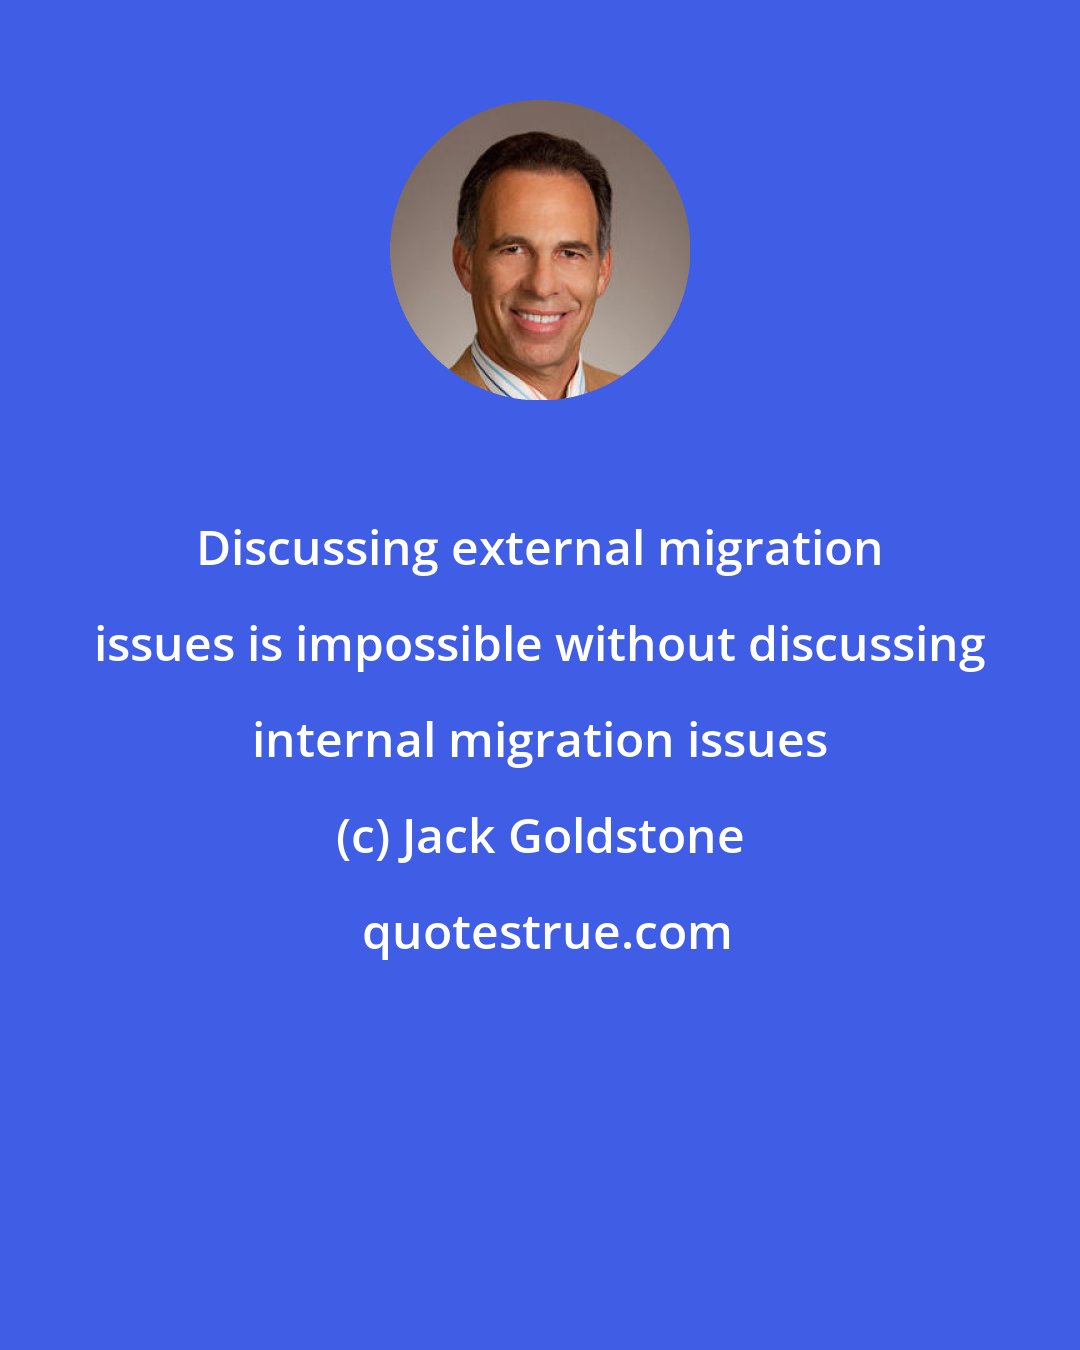 Jack Goldstone: Discussing external migration issues is impossible without discussing internal migration issues